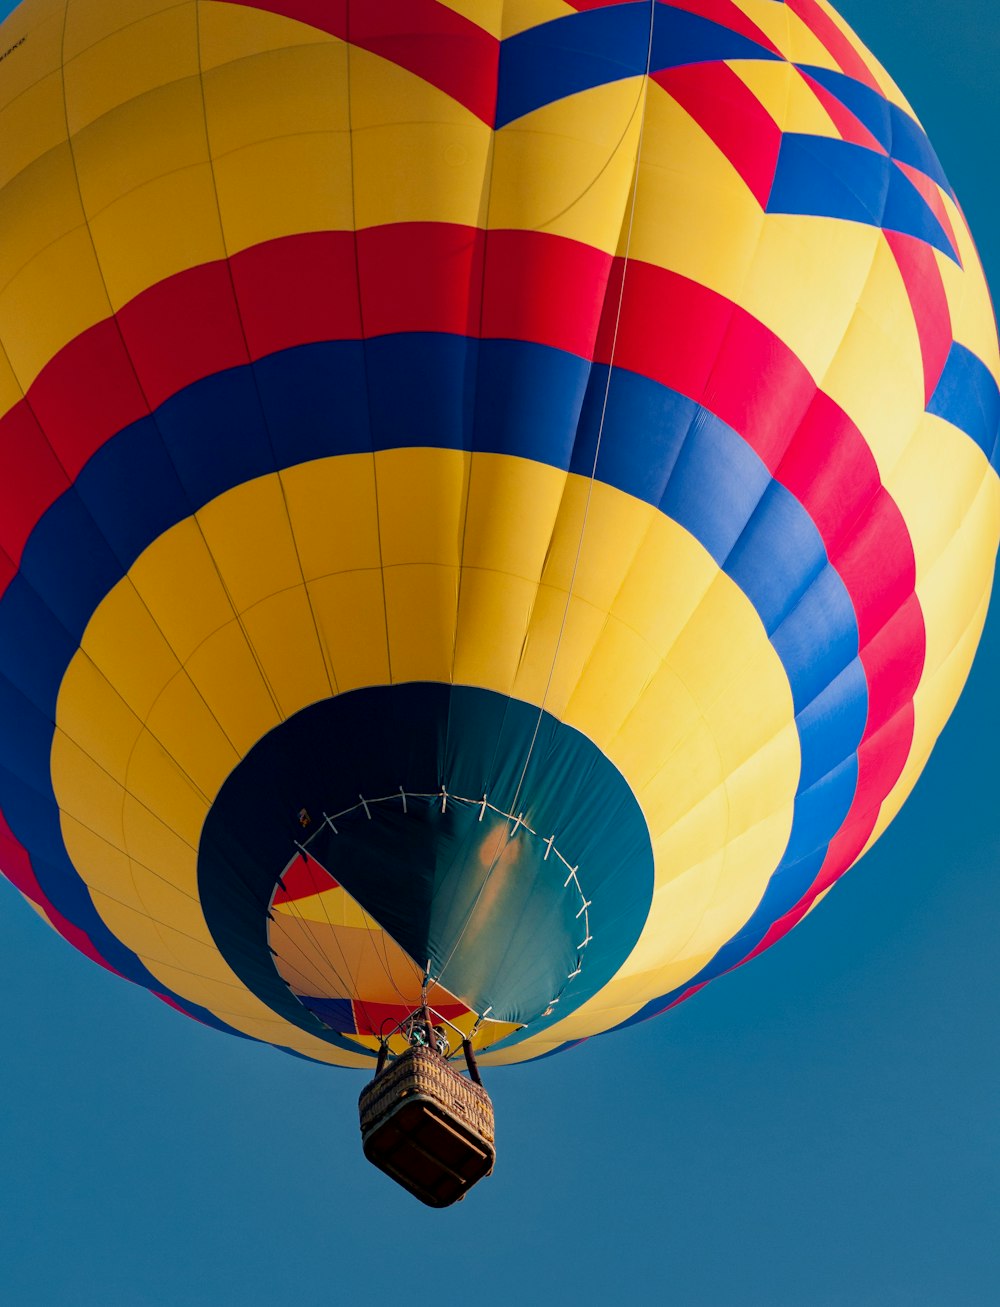 a large colorful hot air balloon flying through a blue sky